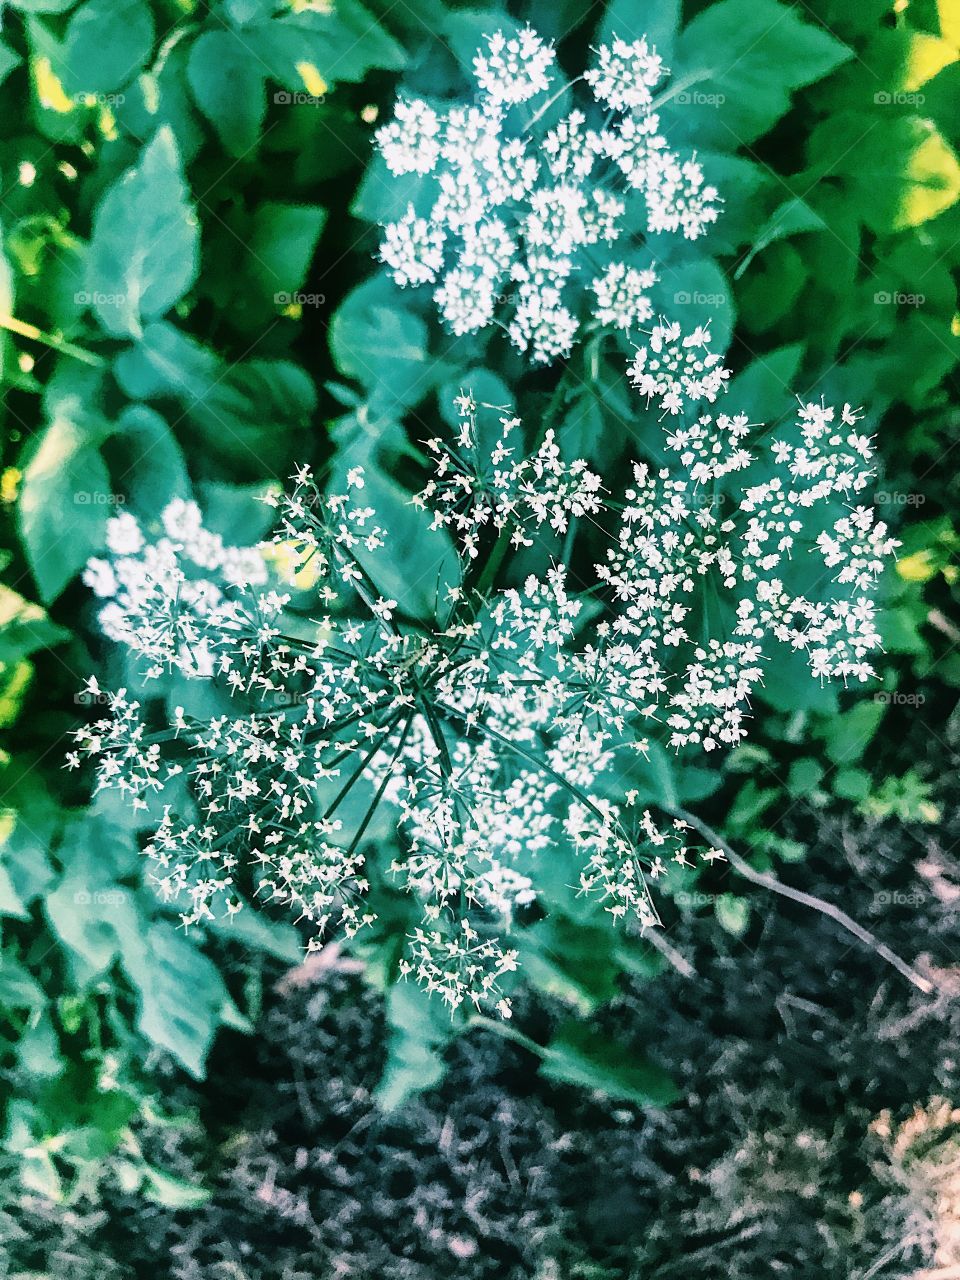 What beauty you see on a walk in the woods